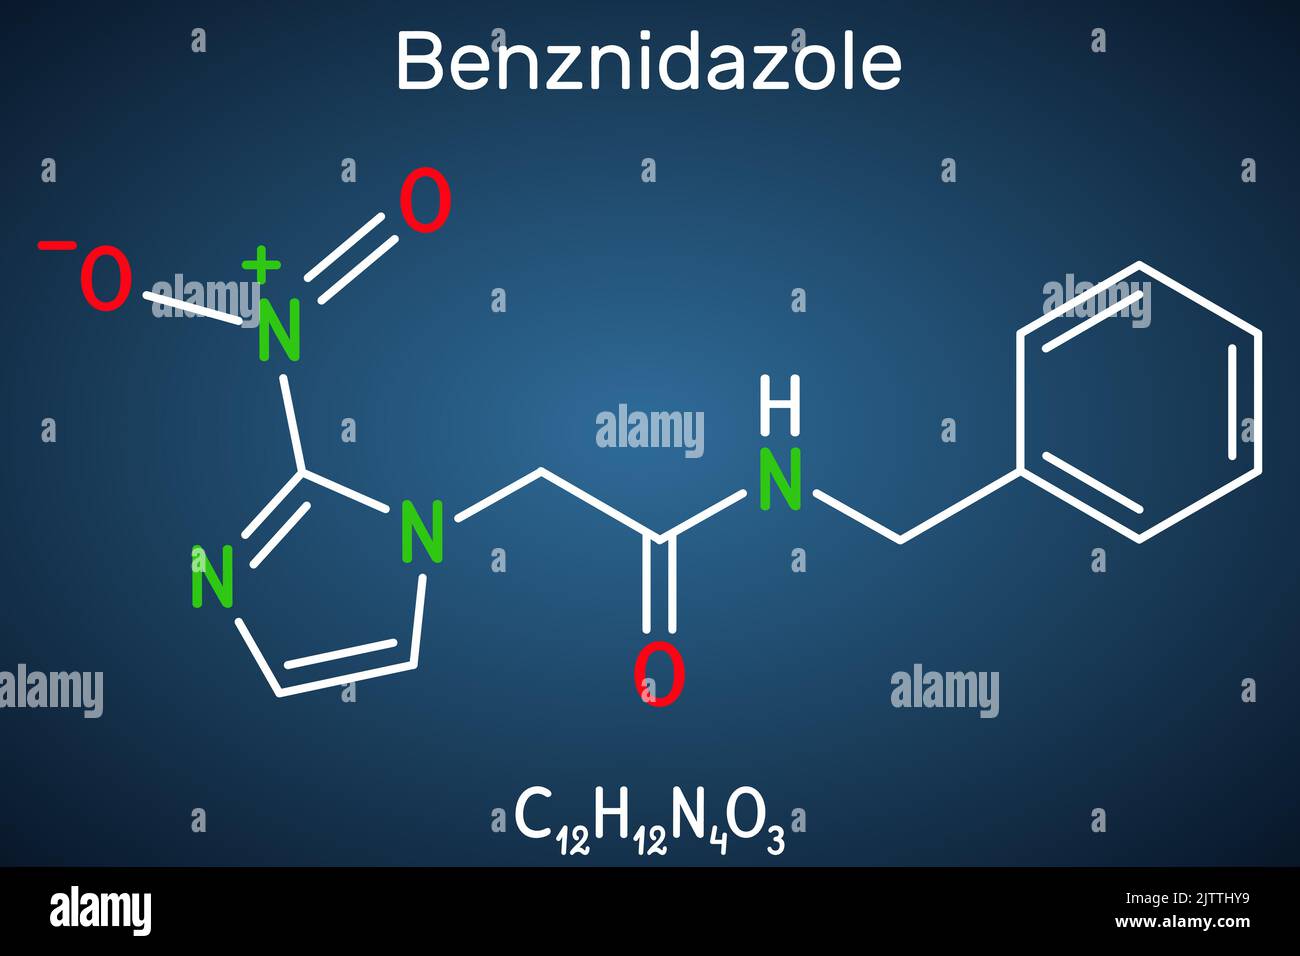 Benznidazole molecule. It is antiparasitic drug used in the treatment of Chagas disease. Structural chemical formula on the dark blue background. Vect Stock Vector